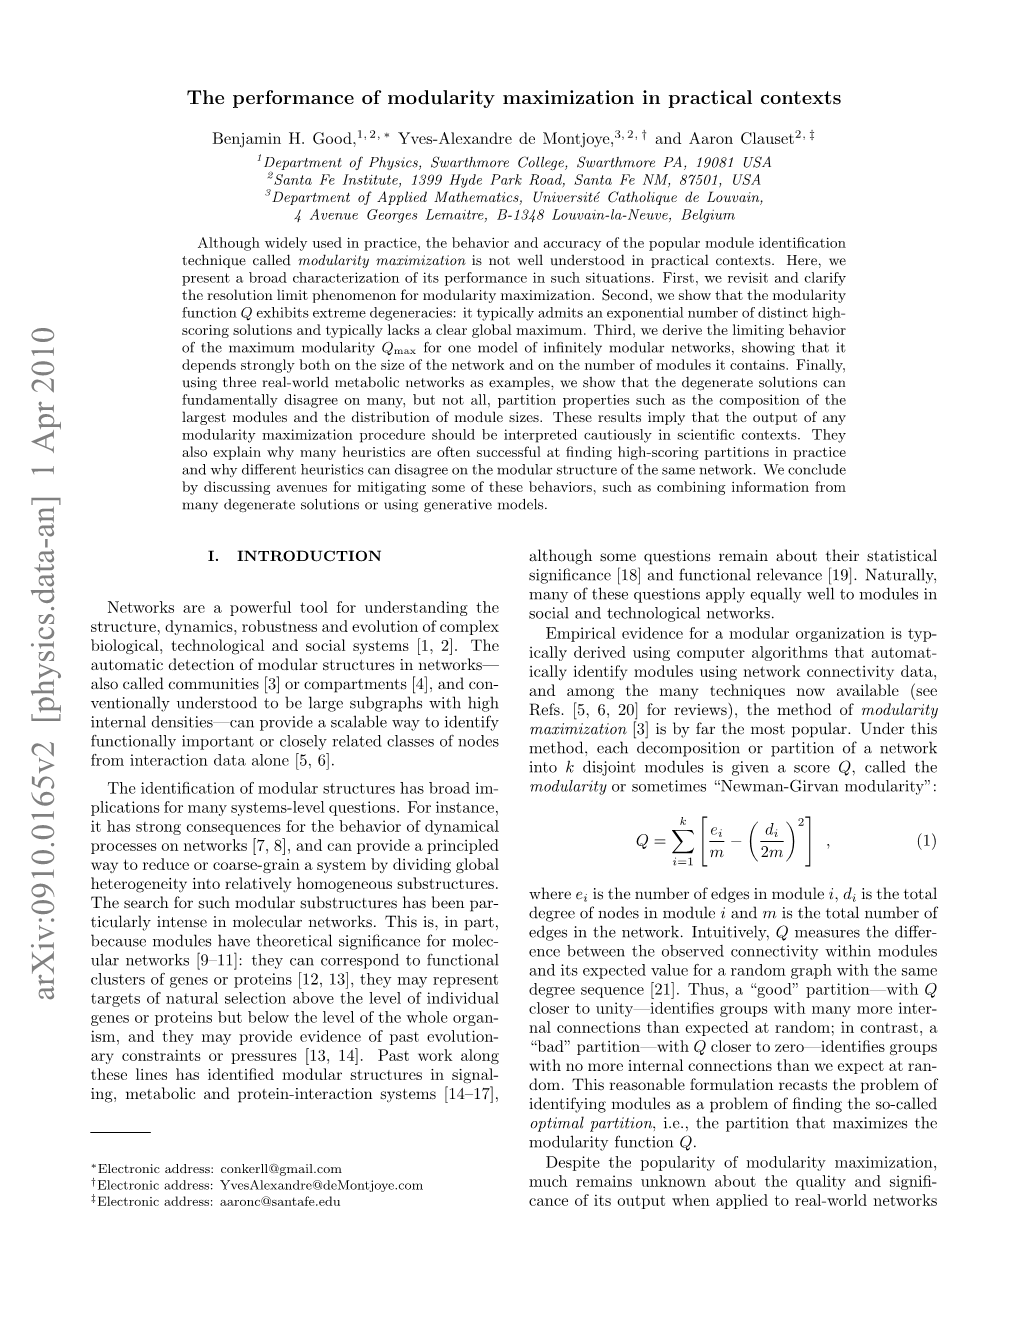 The Performance of Modularity Maximization in Practical Contexts